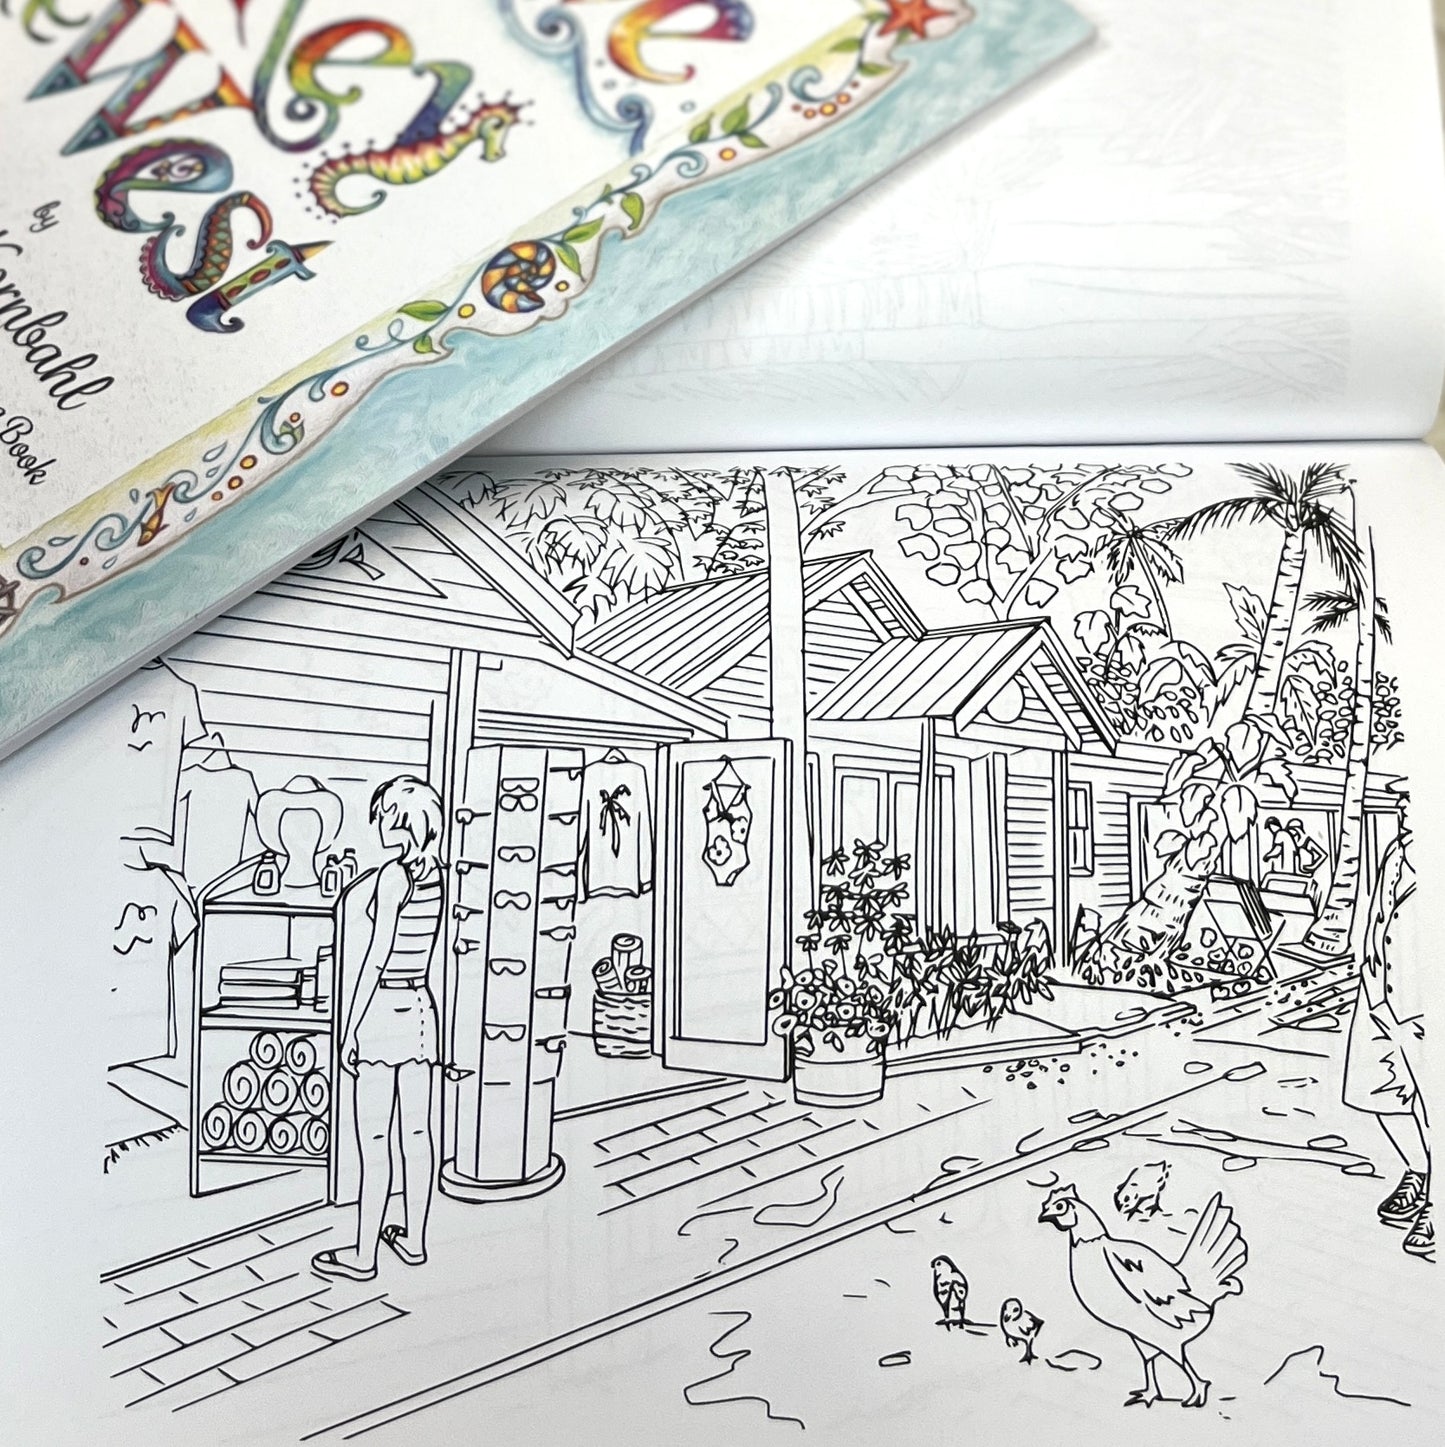 Love Key West coloring book from Talula Land